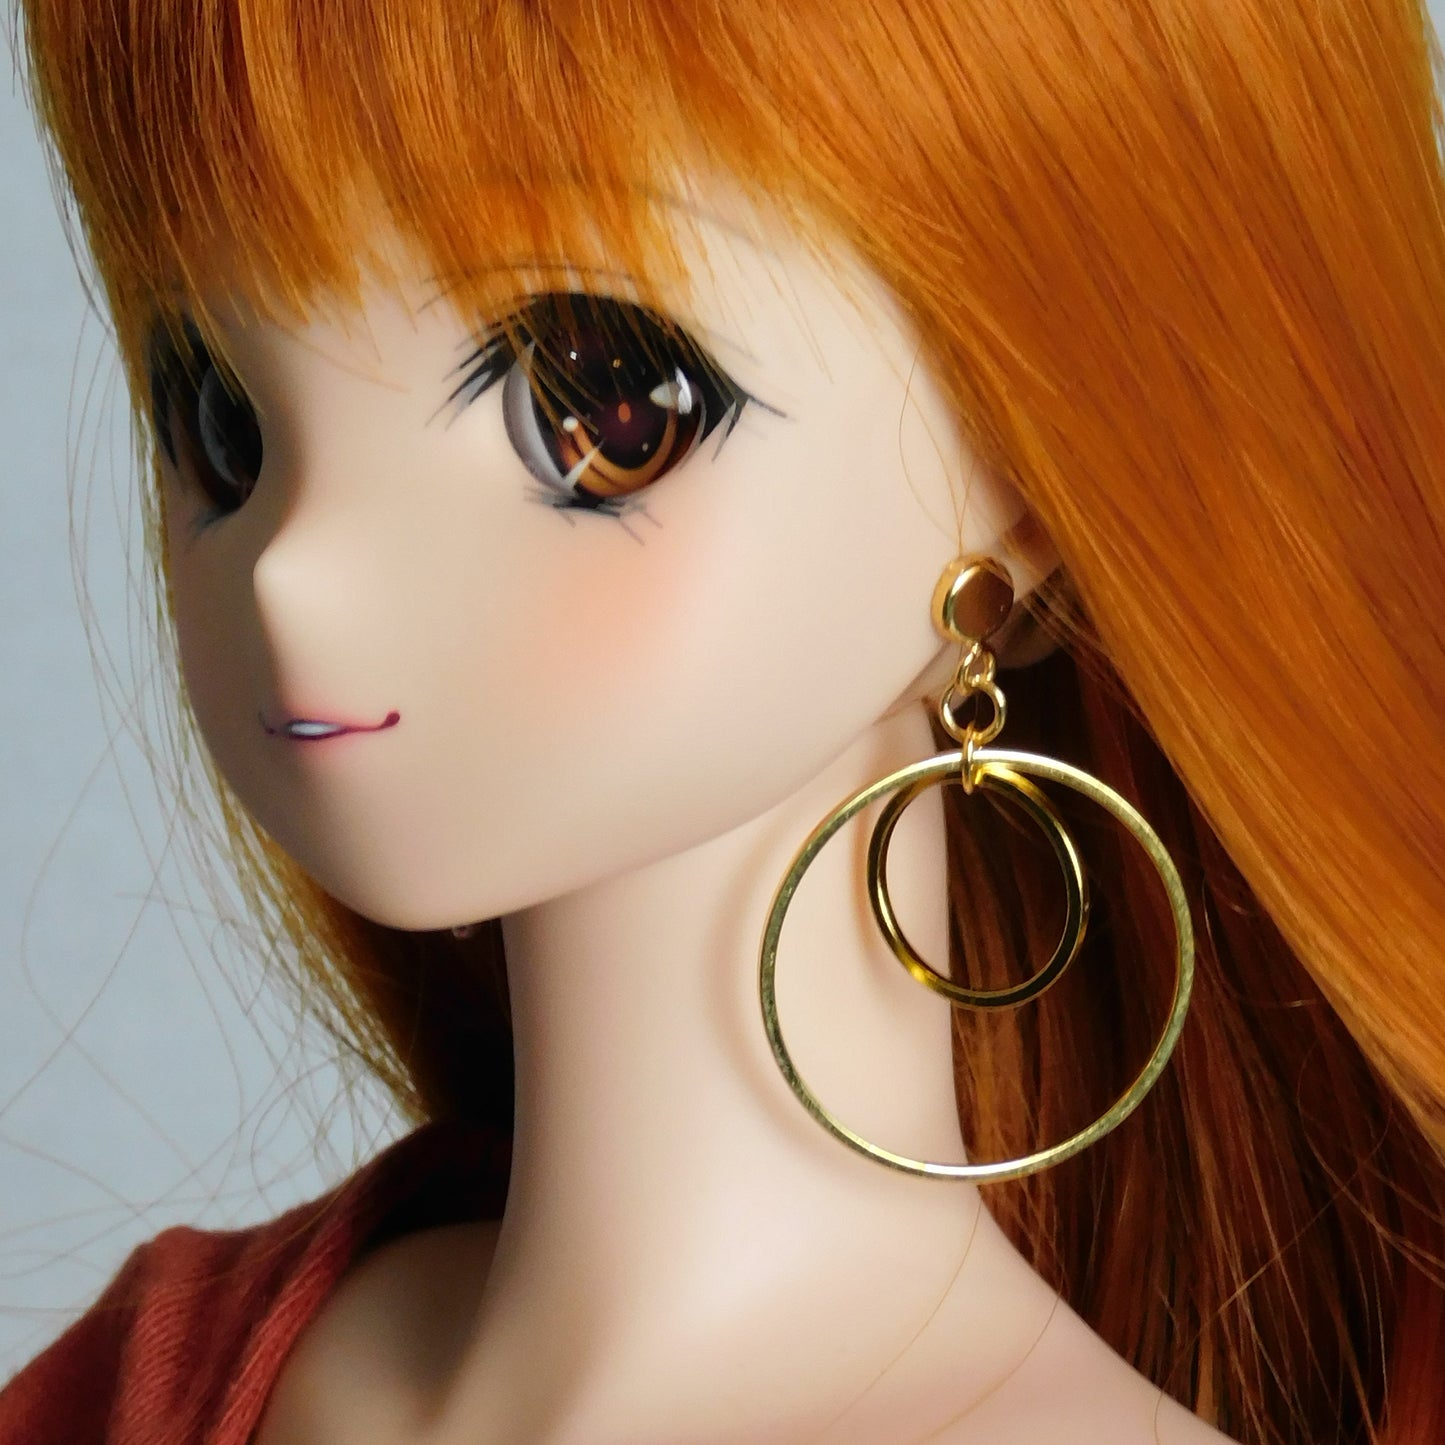 No-Hole Earring for Vinyl Dolls - Round Double Hoop (Silver or Gold)